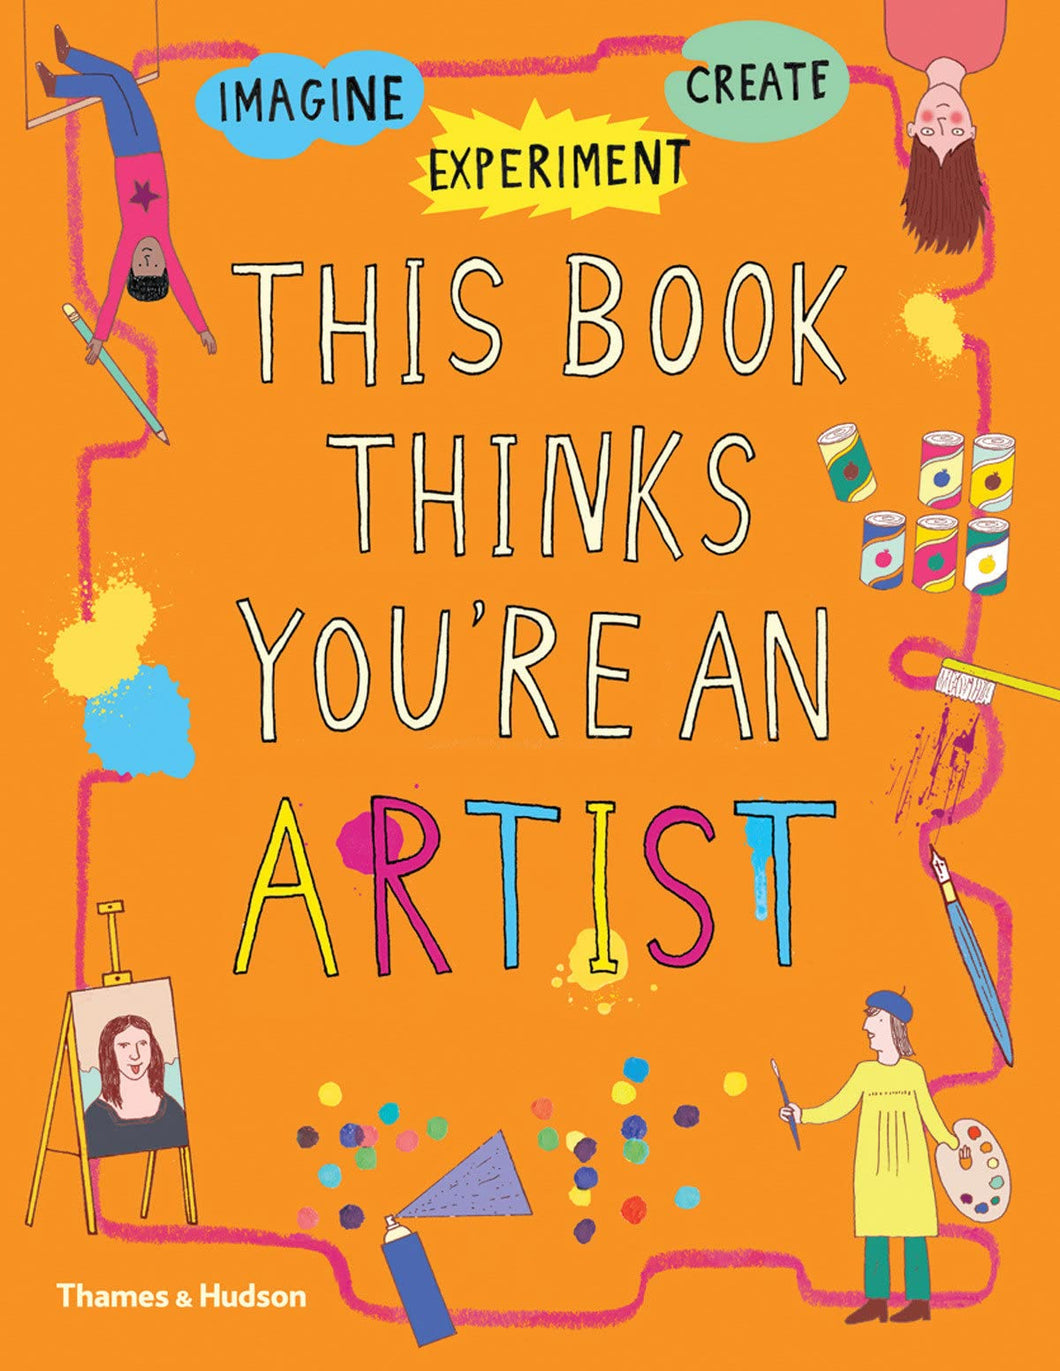 This book thinks your an artist front cover 